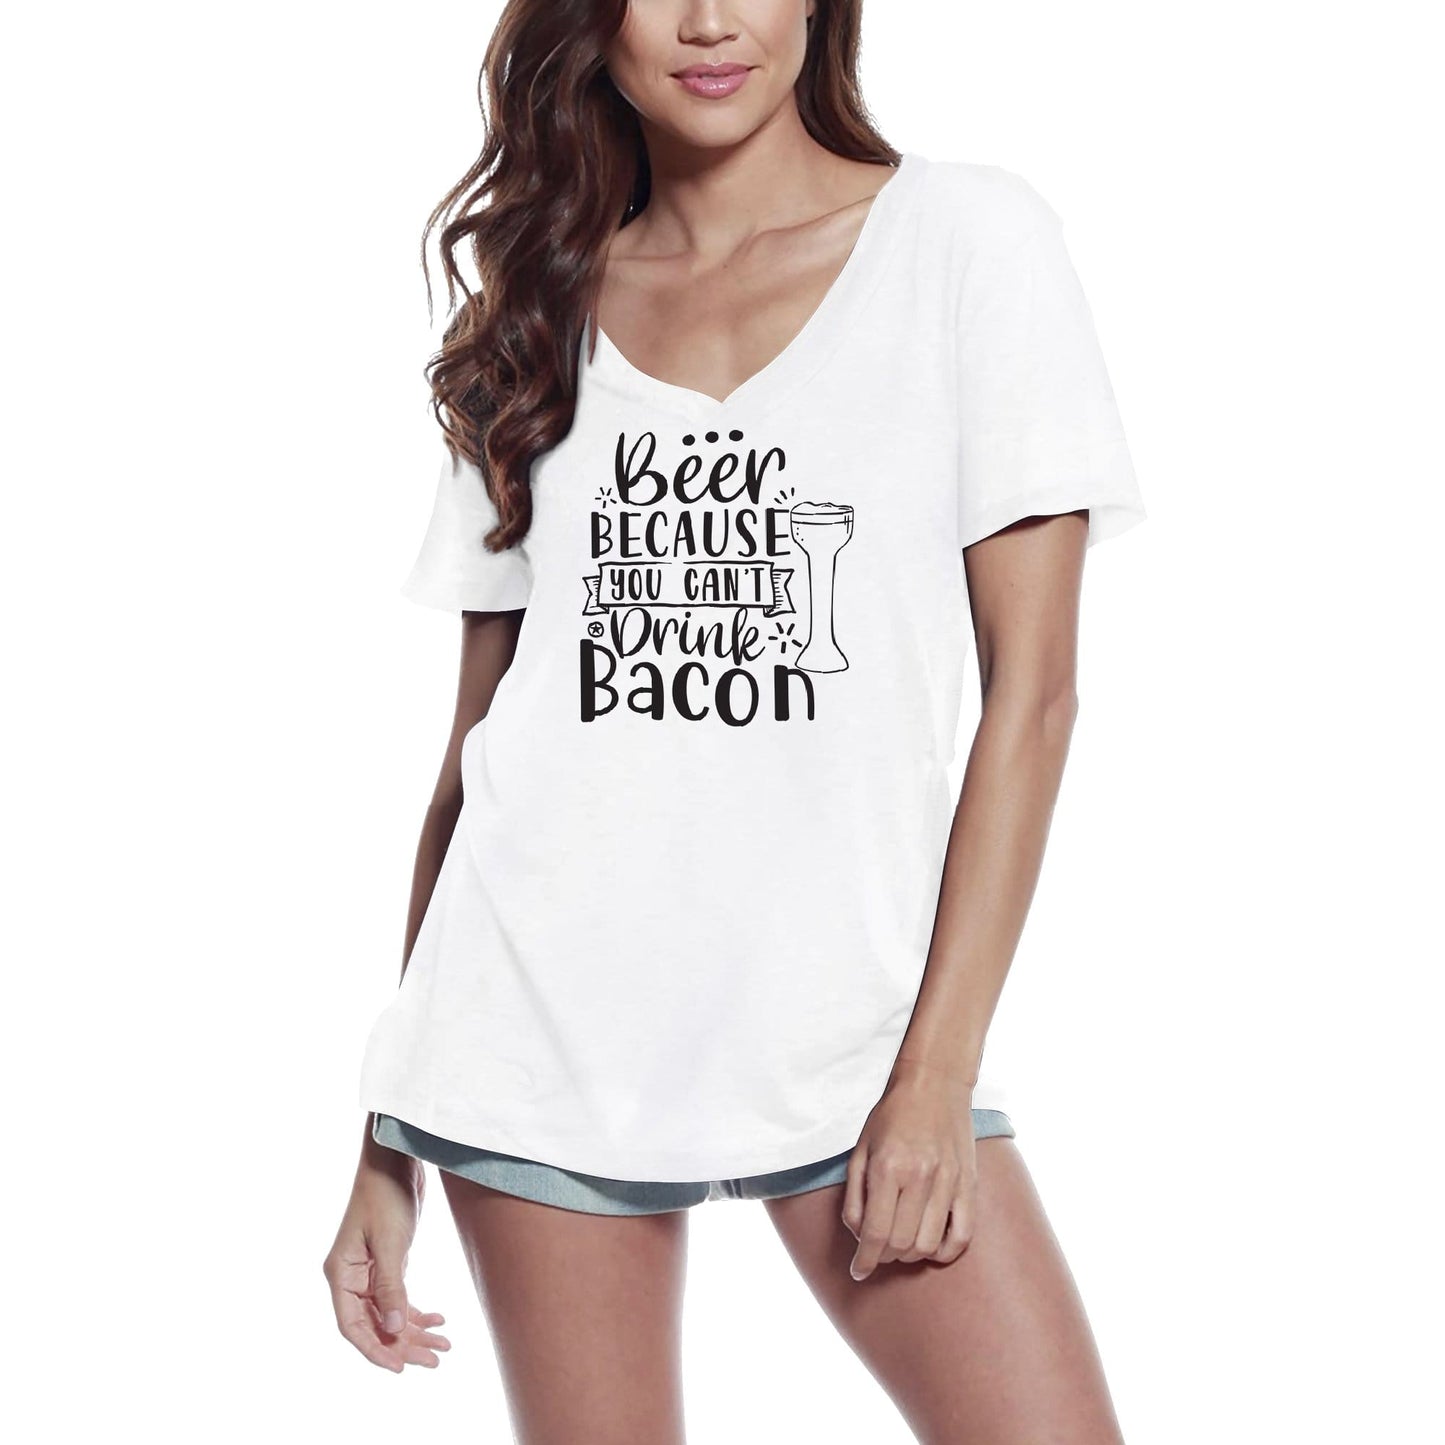 ULTRABASIC Women's T-Shirt Beer Because You Can't Drink Bacon - Funny Short Sleeve Tee Shirt